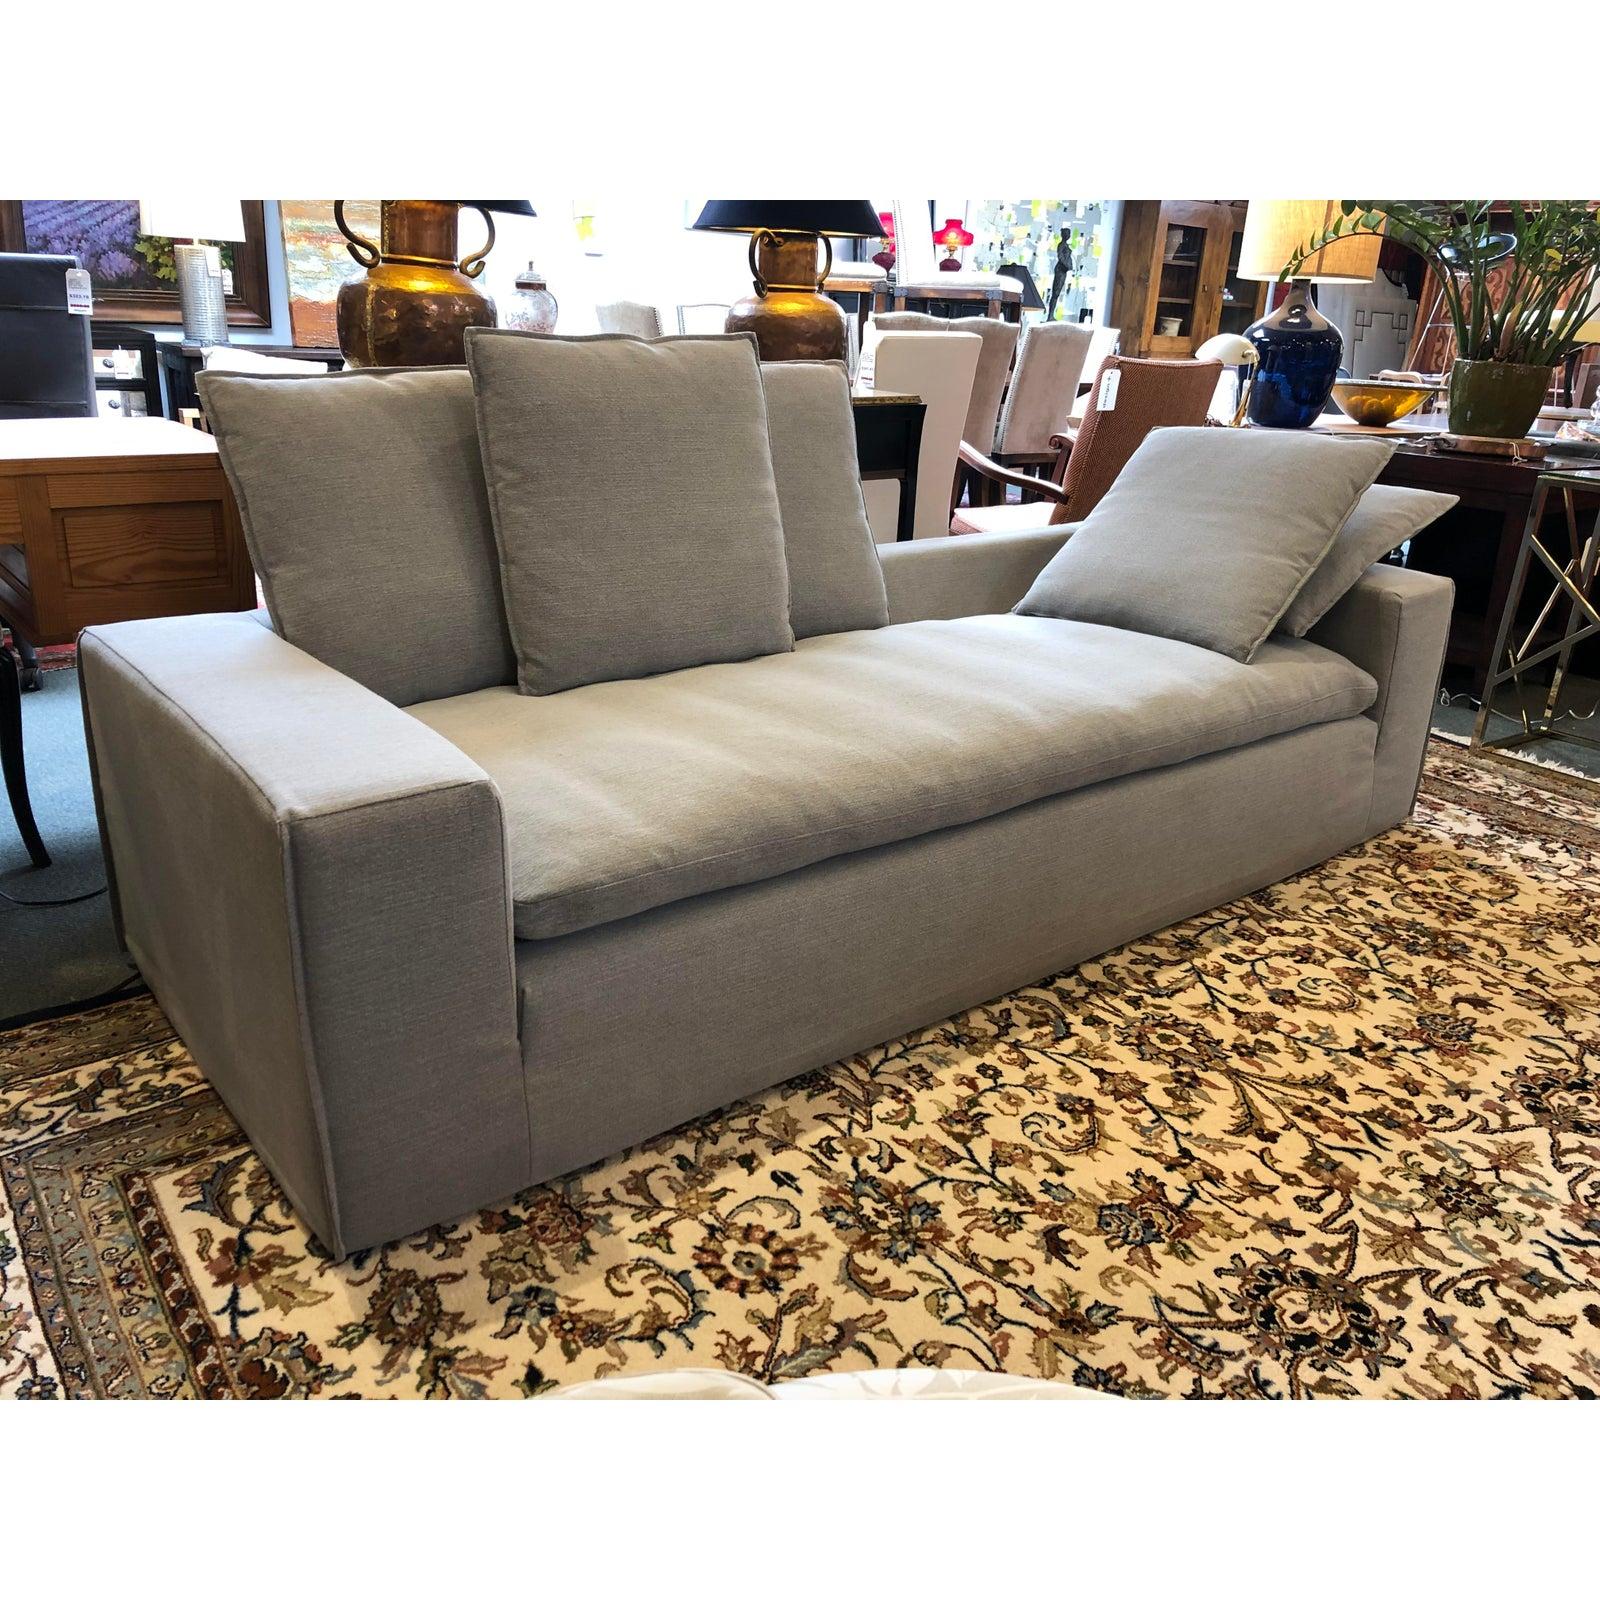 Design Plus Gallery presents a contemporary sofa by Four Hands. Contemporary in style with clean lines and neutral upholstery, the large seating has a low back which makes it perfect for use as a daybed or chaise as well as standard seating.